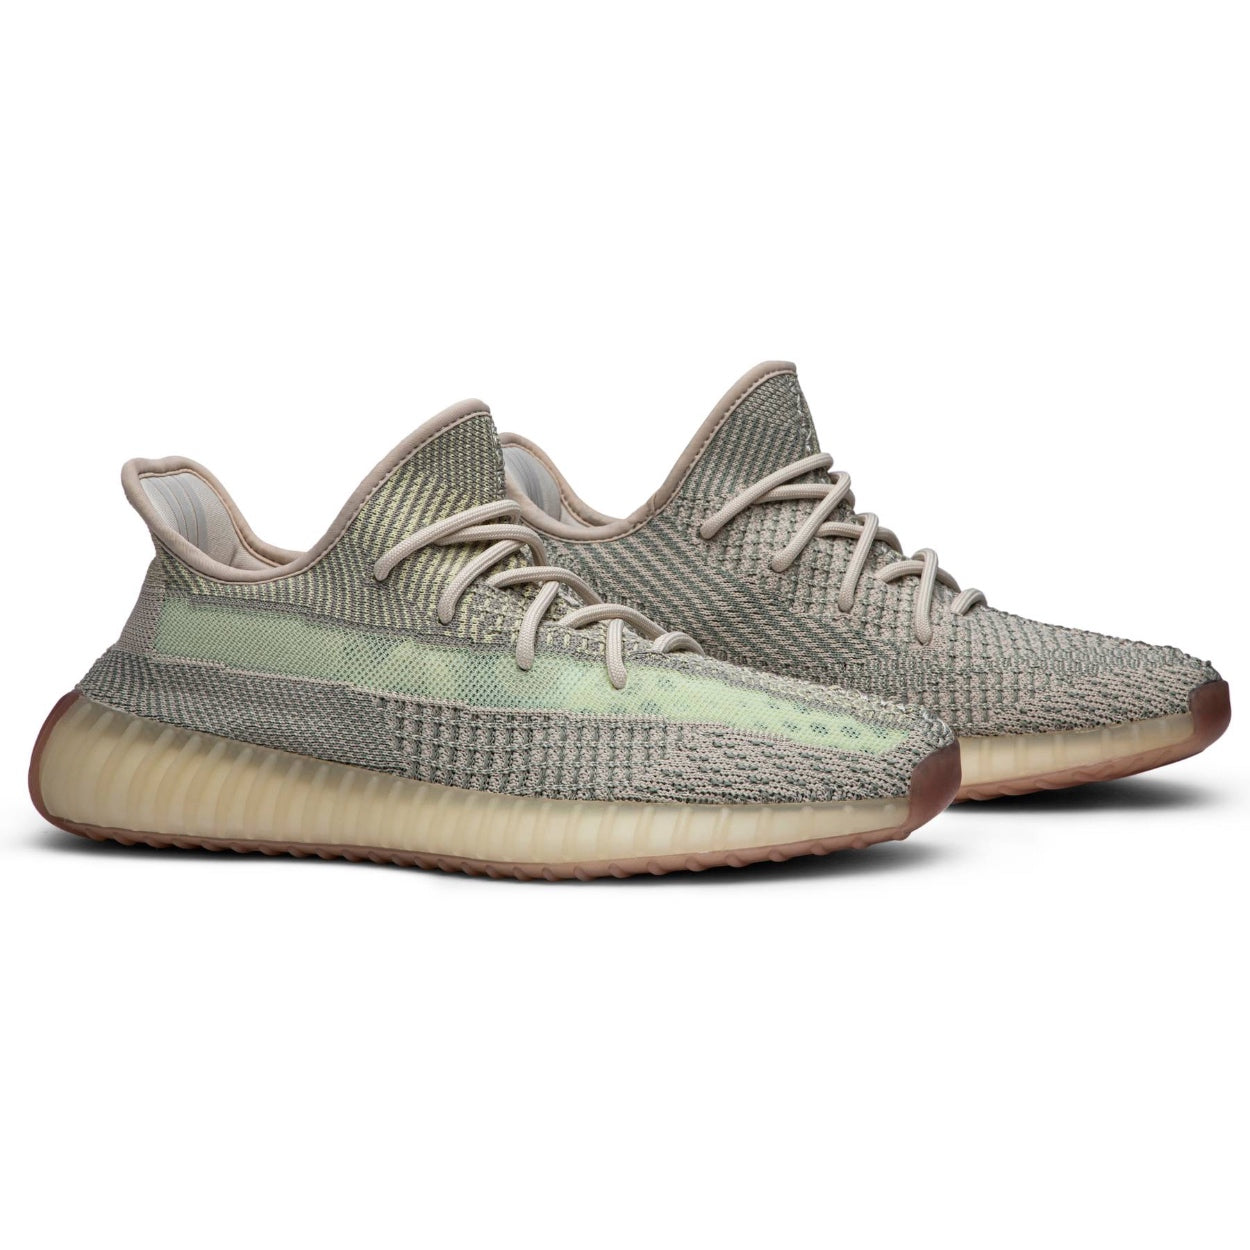 adidas Yeezy Boost 350 V2 'Citrin Non-Reflective' - After Burn